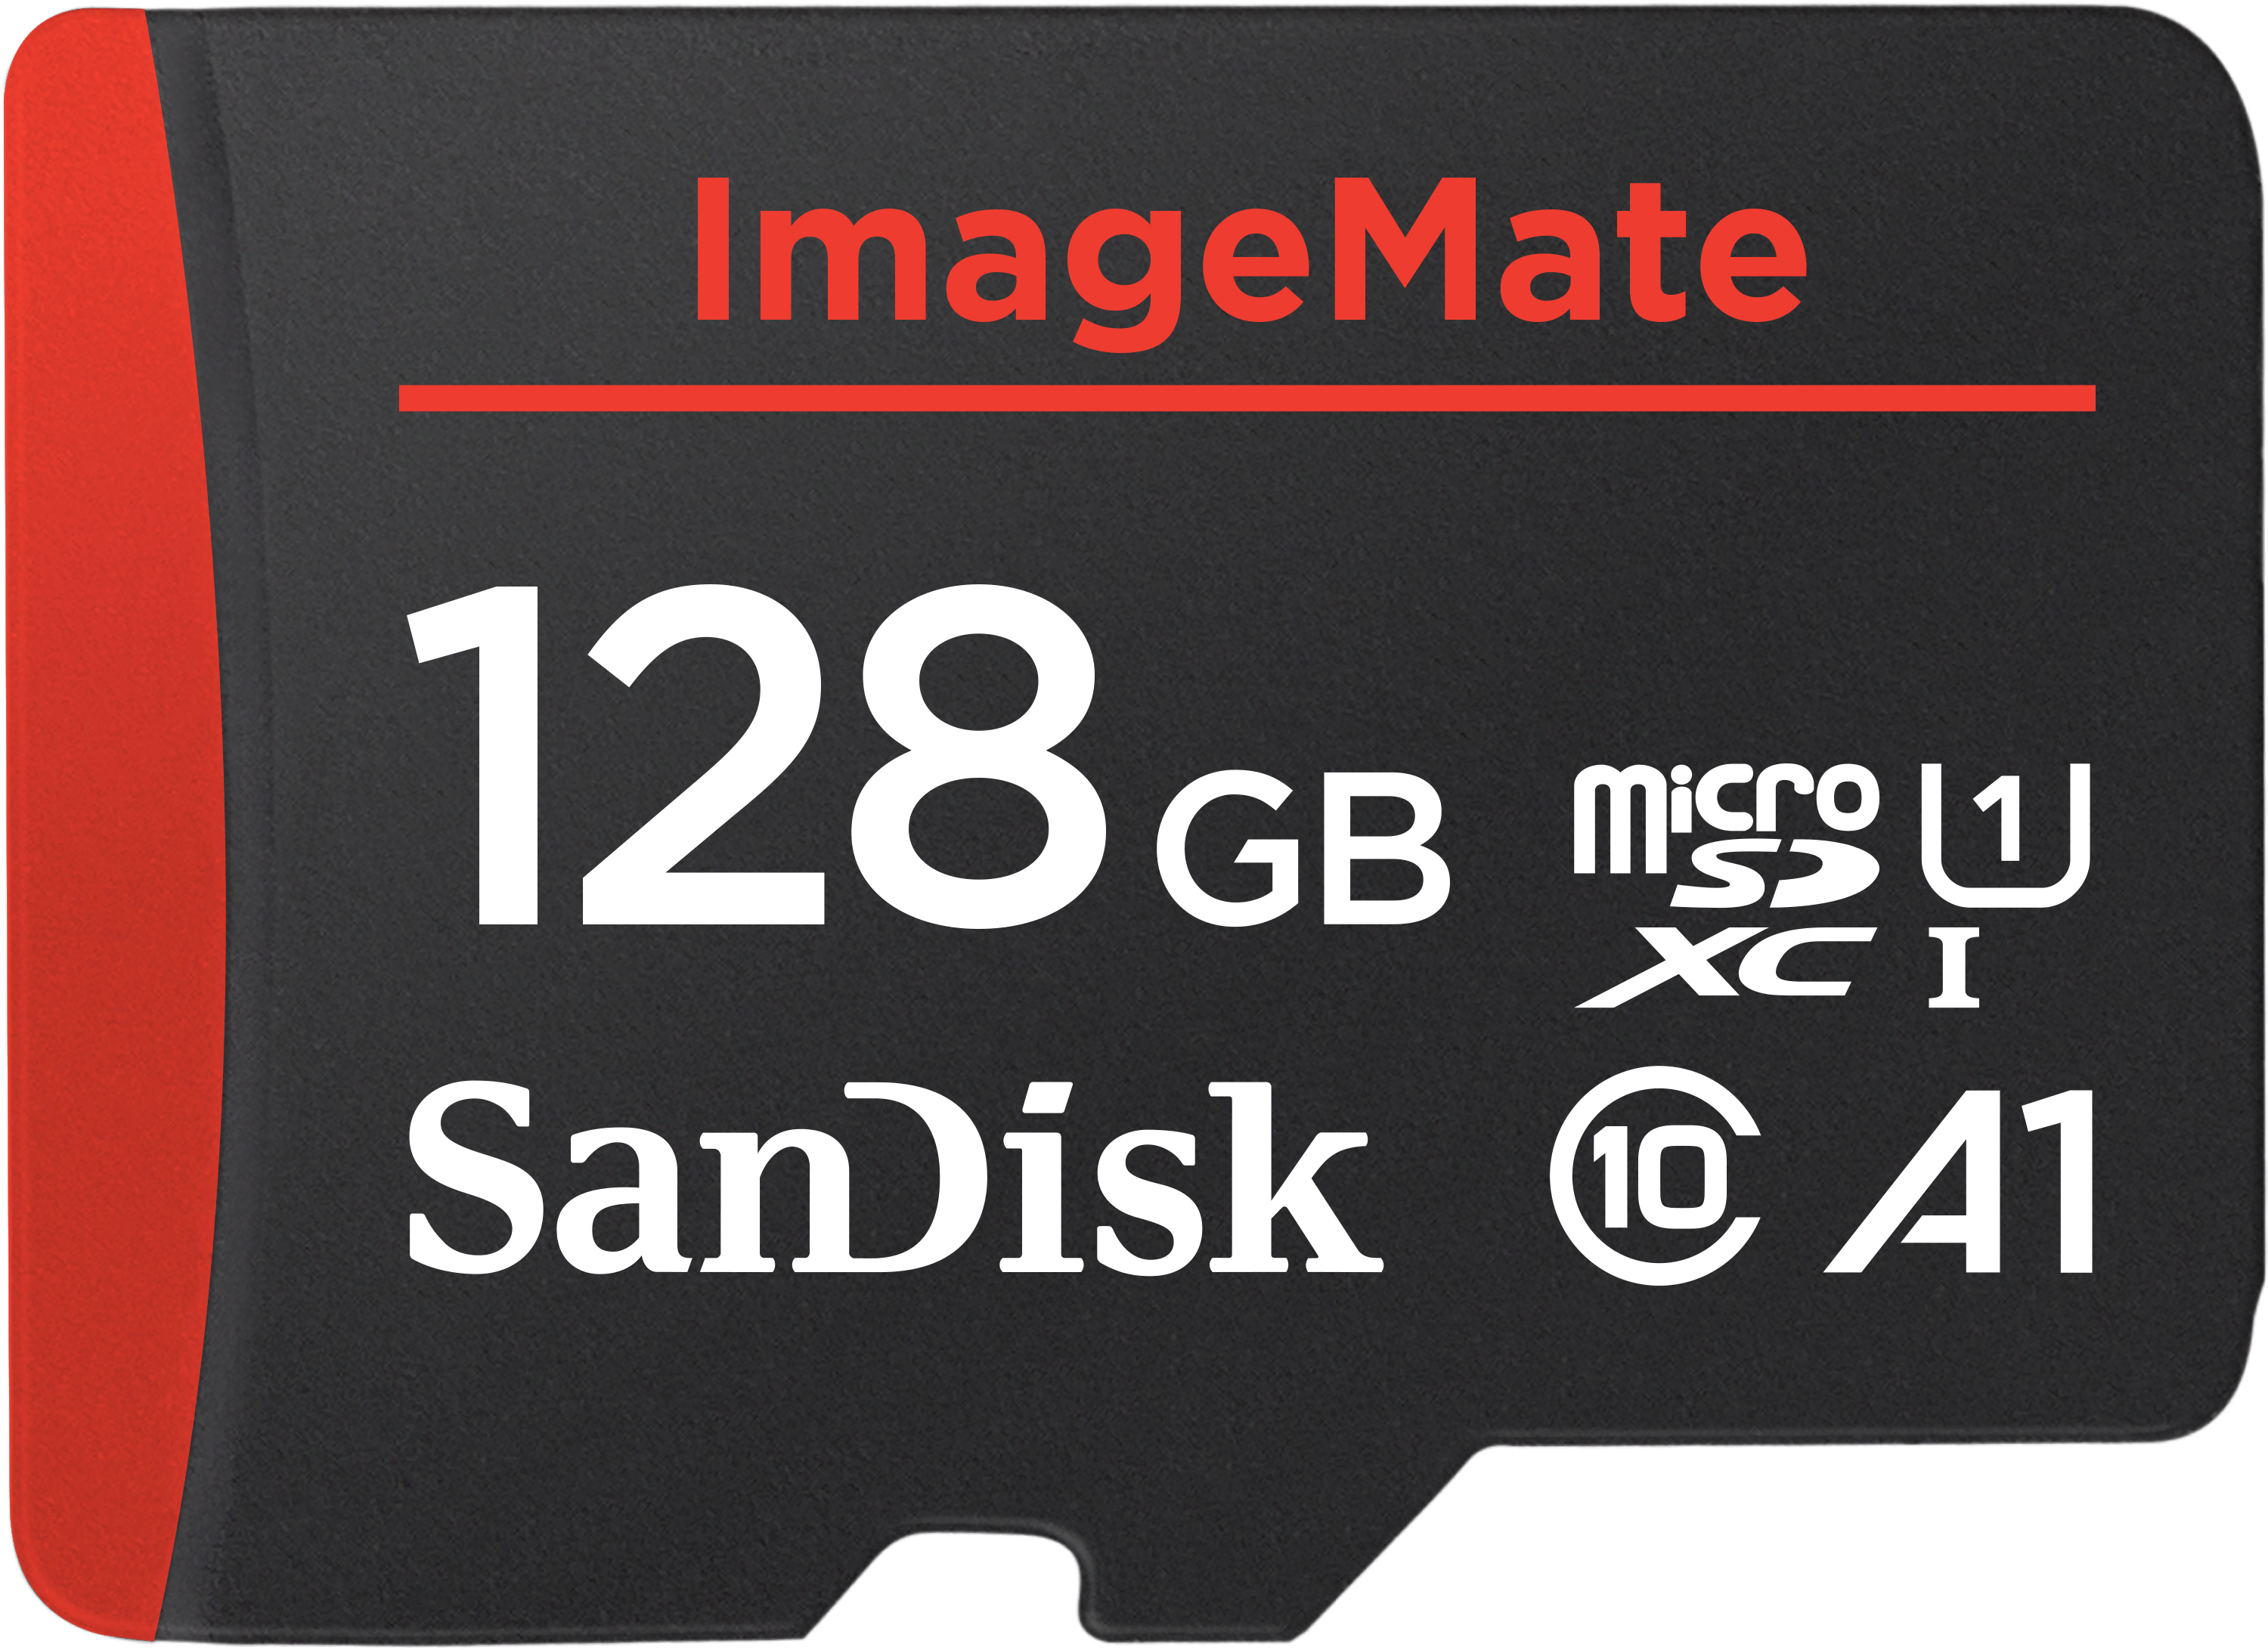 SanDisk 128 GB ImageMate microSDXC UHS-1 Memory Card with Adapter - C10, U1, Full HD, A1 Micro SD Card - image 1 of 5